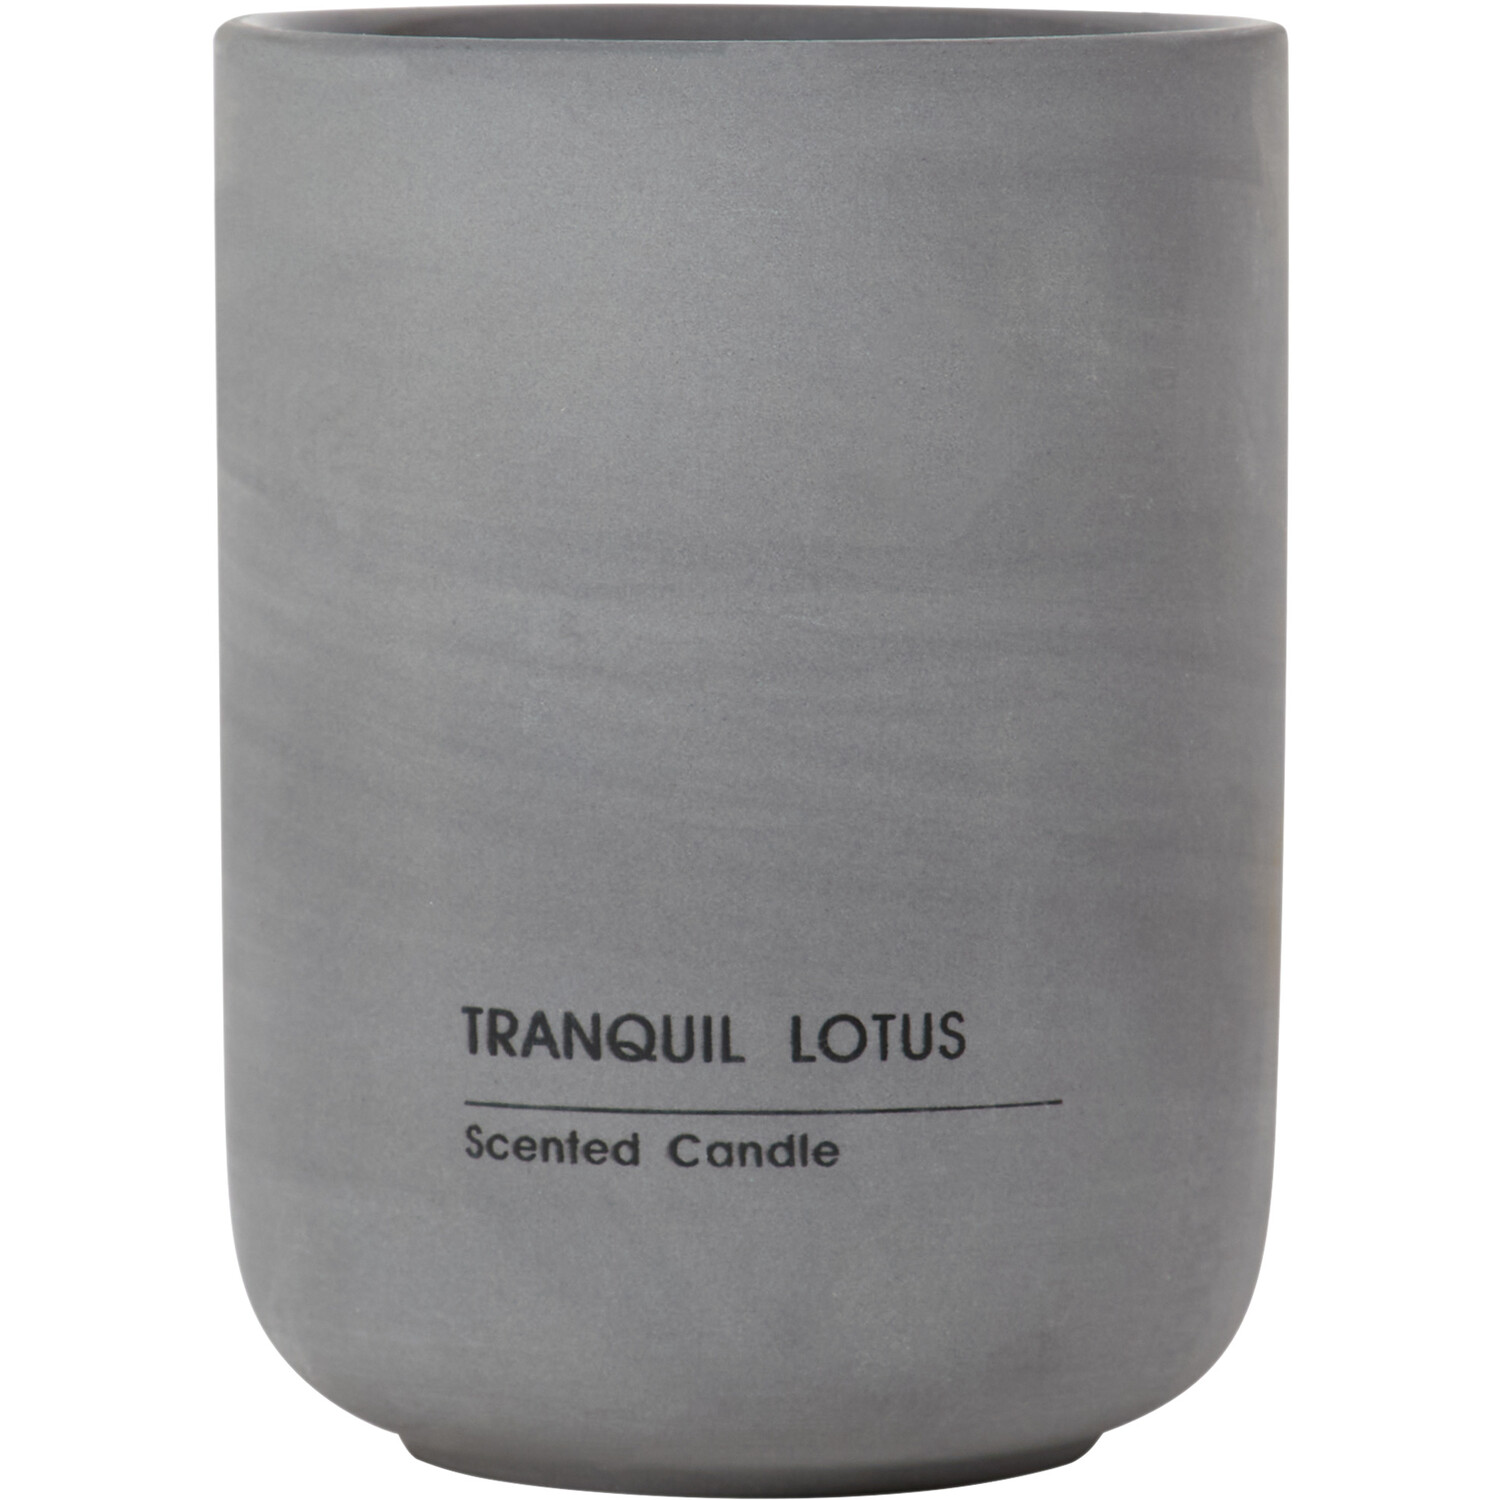 Tranquil Lotus Candle - Grey Image 1